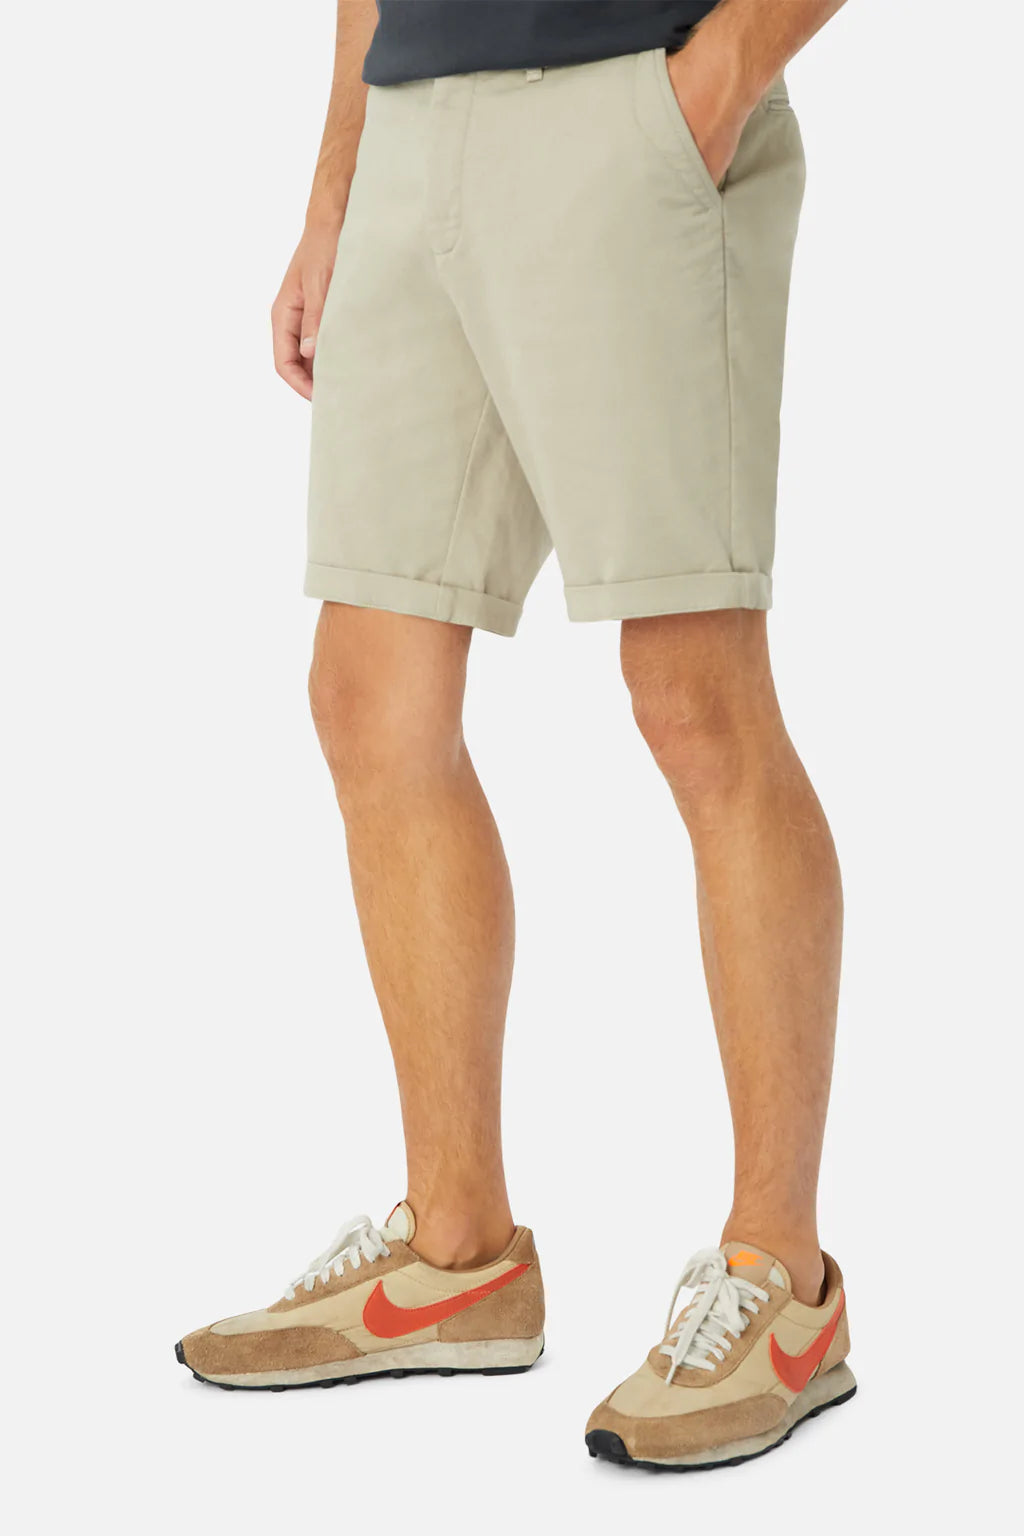 INDUSTRIE - THE RINSE DRIFTER SHORT - OD STONE